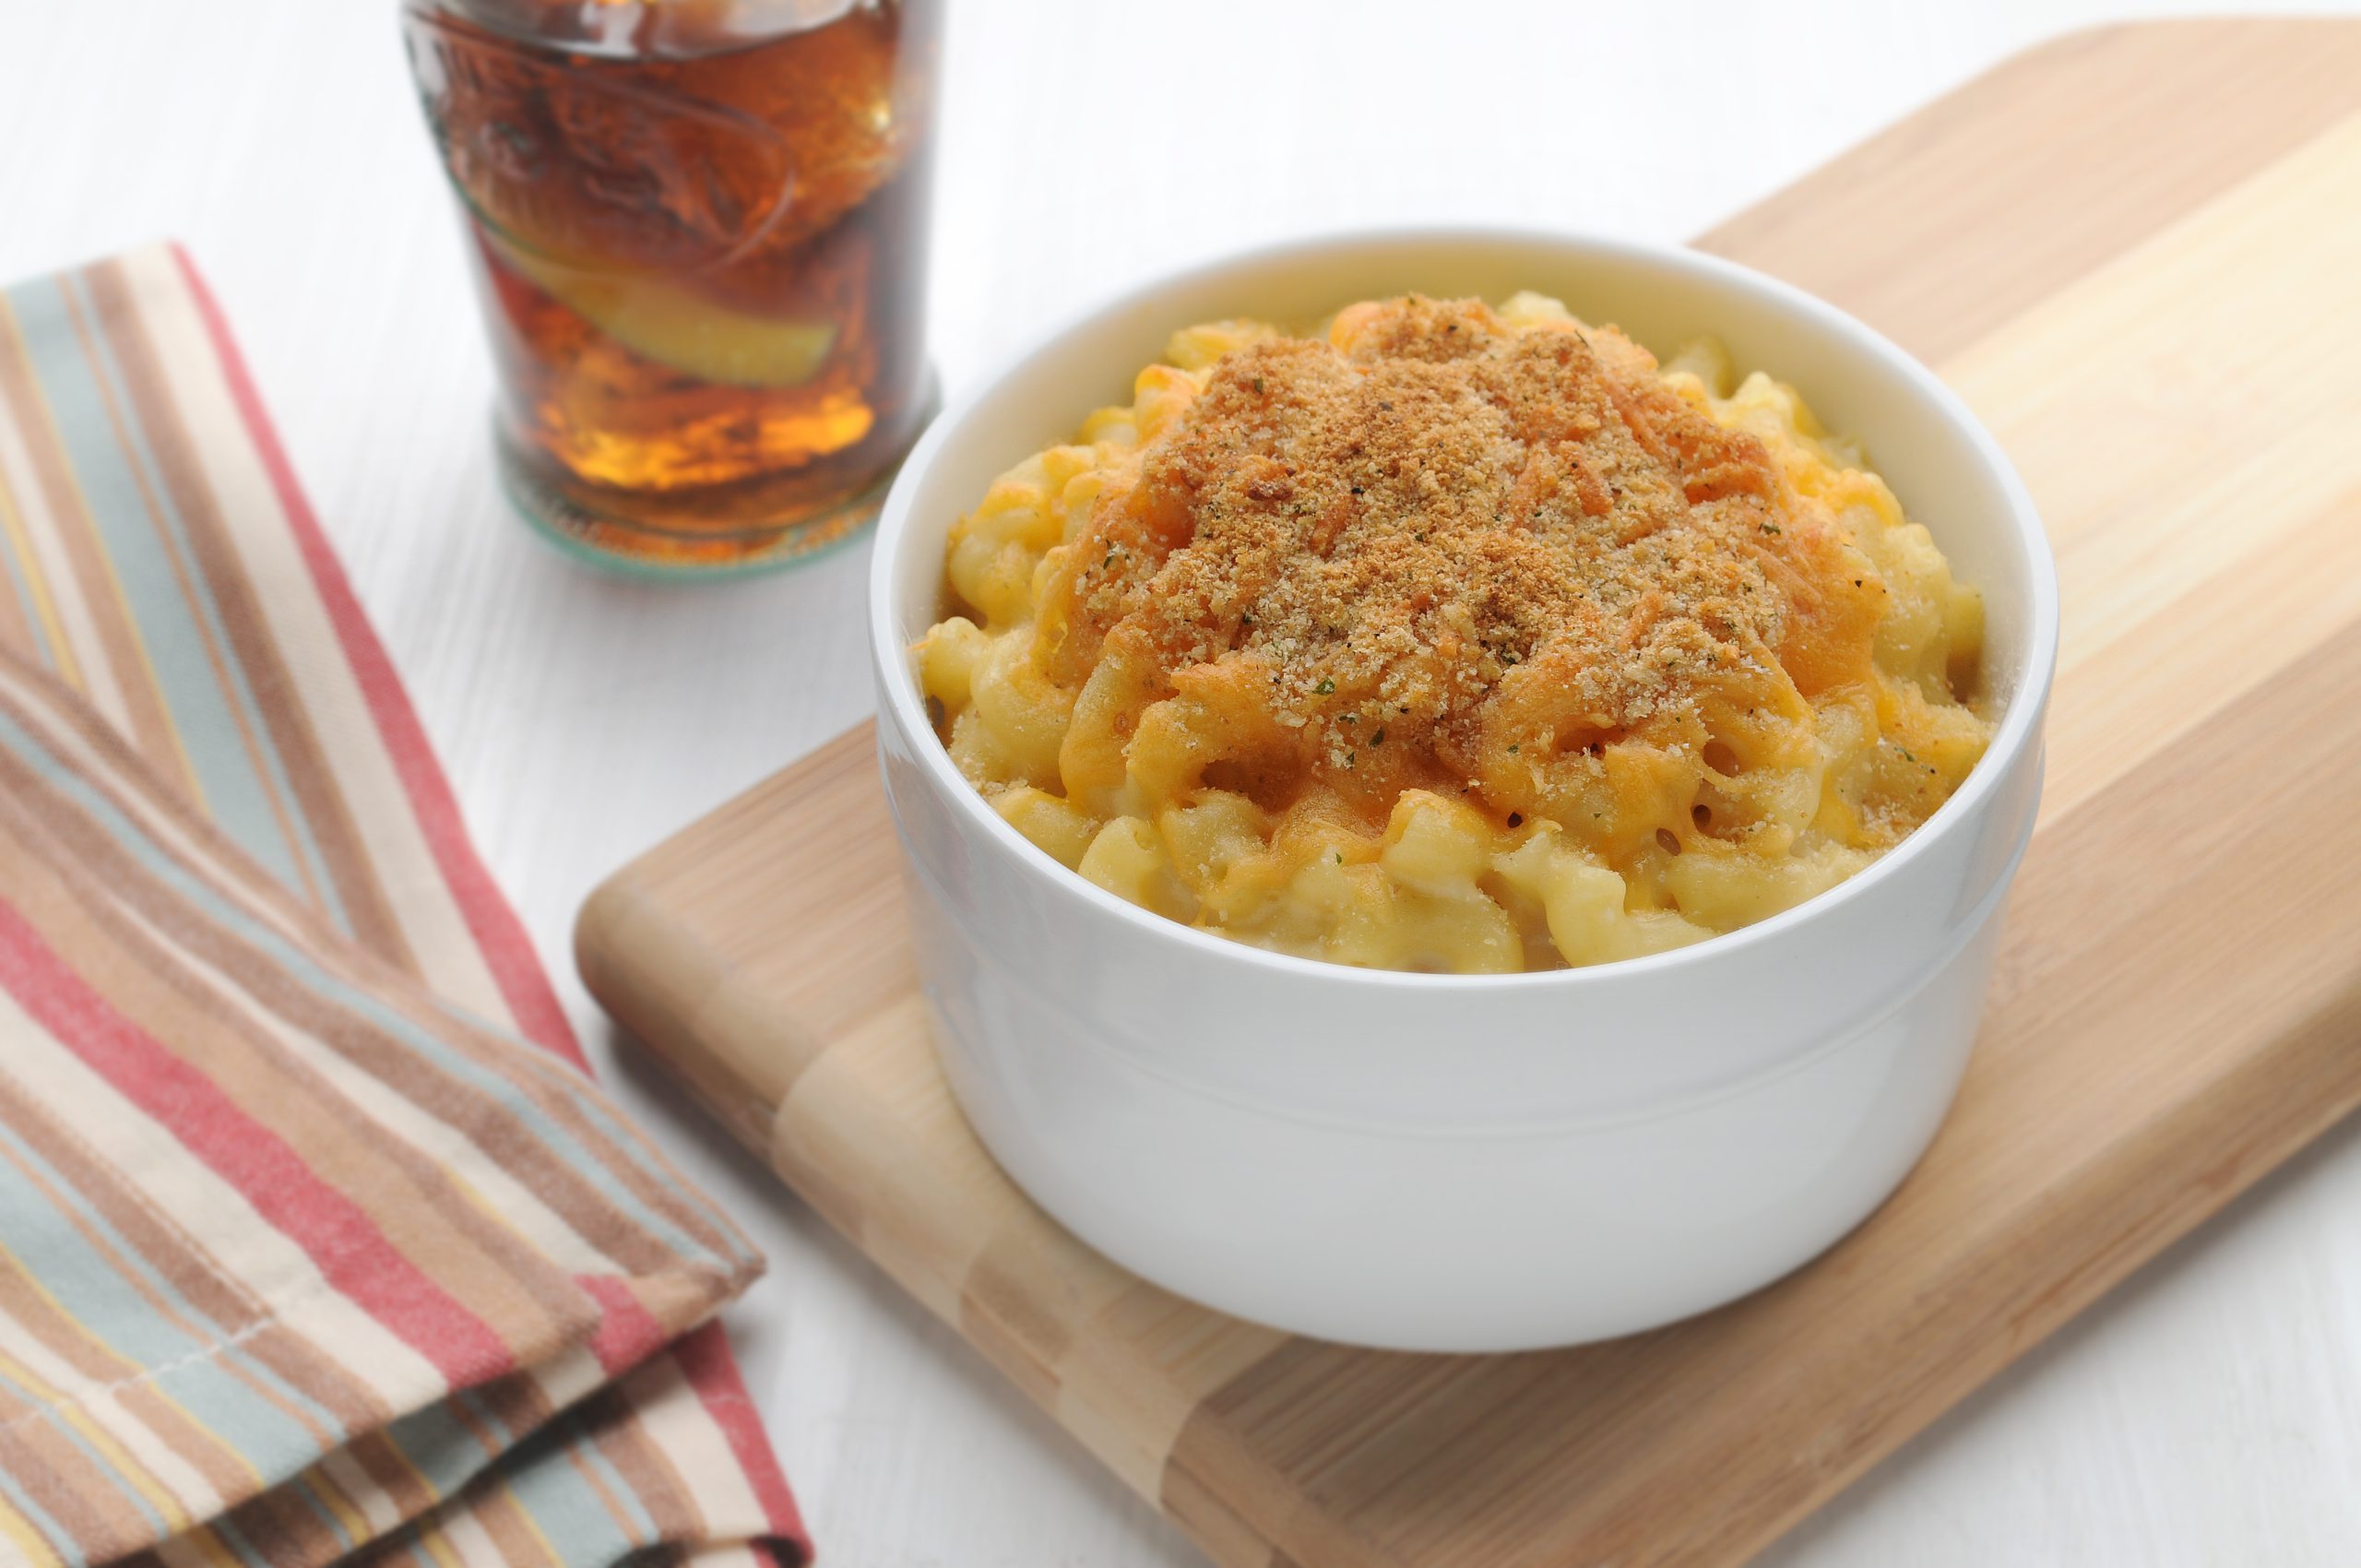 Cheddar and Swiss Macaroni and Cheese, topped with bread crumbs in a ramekin